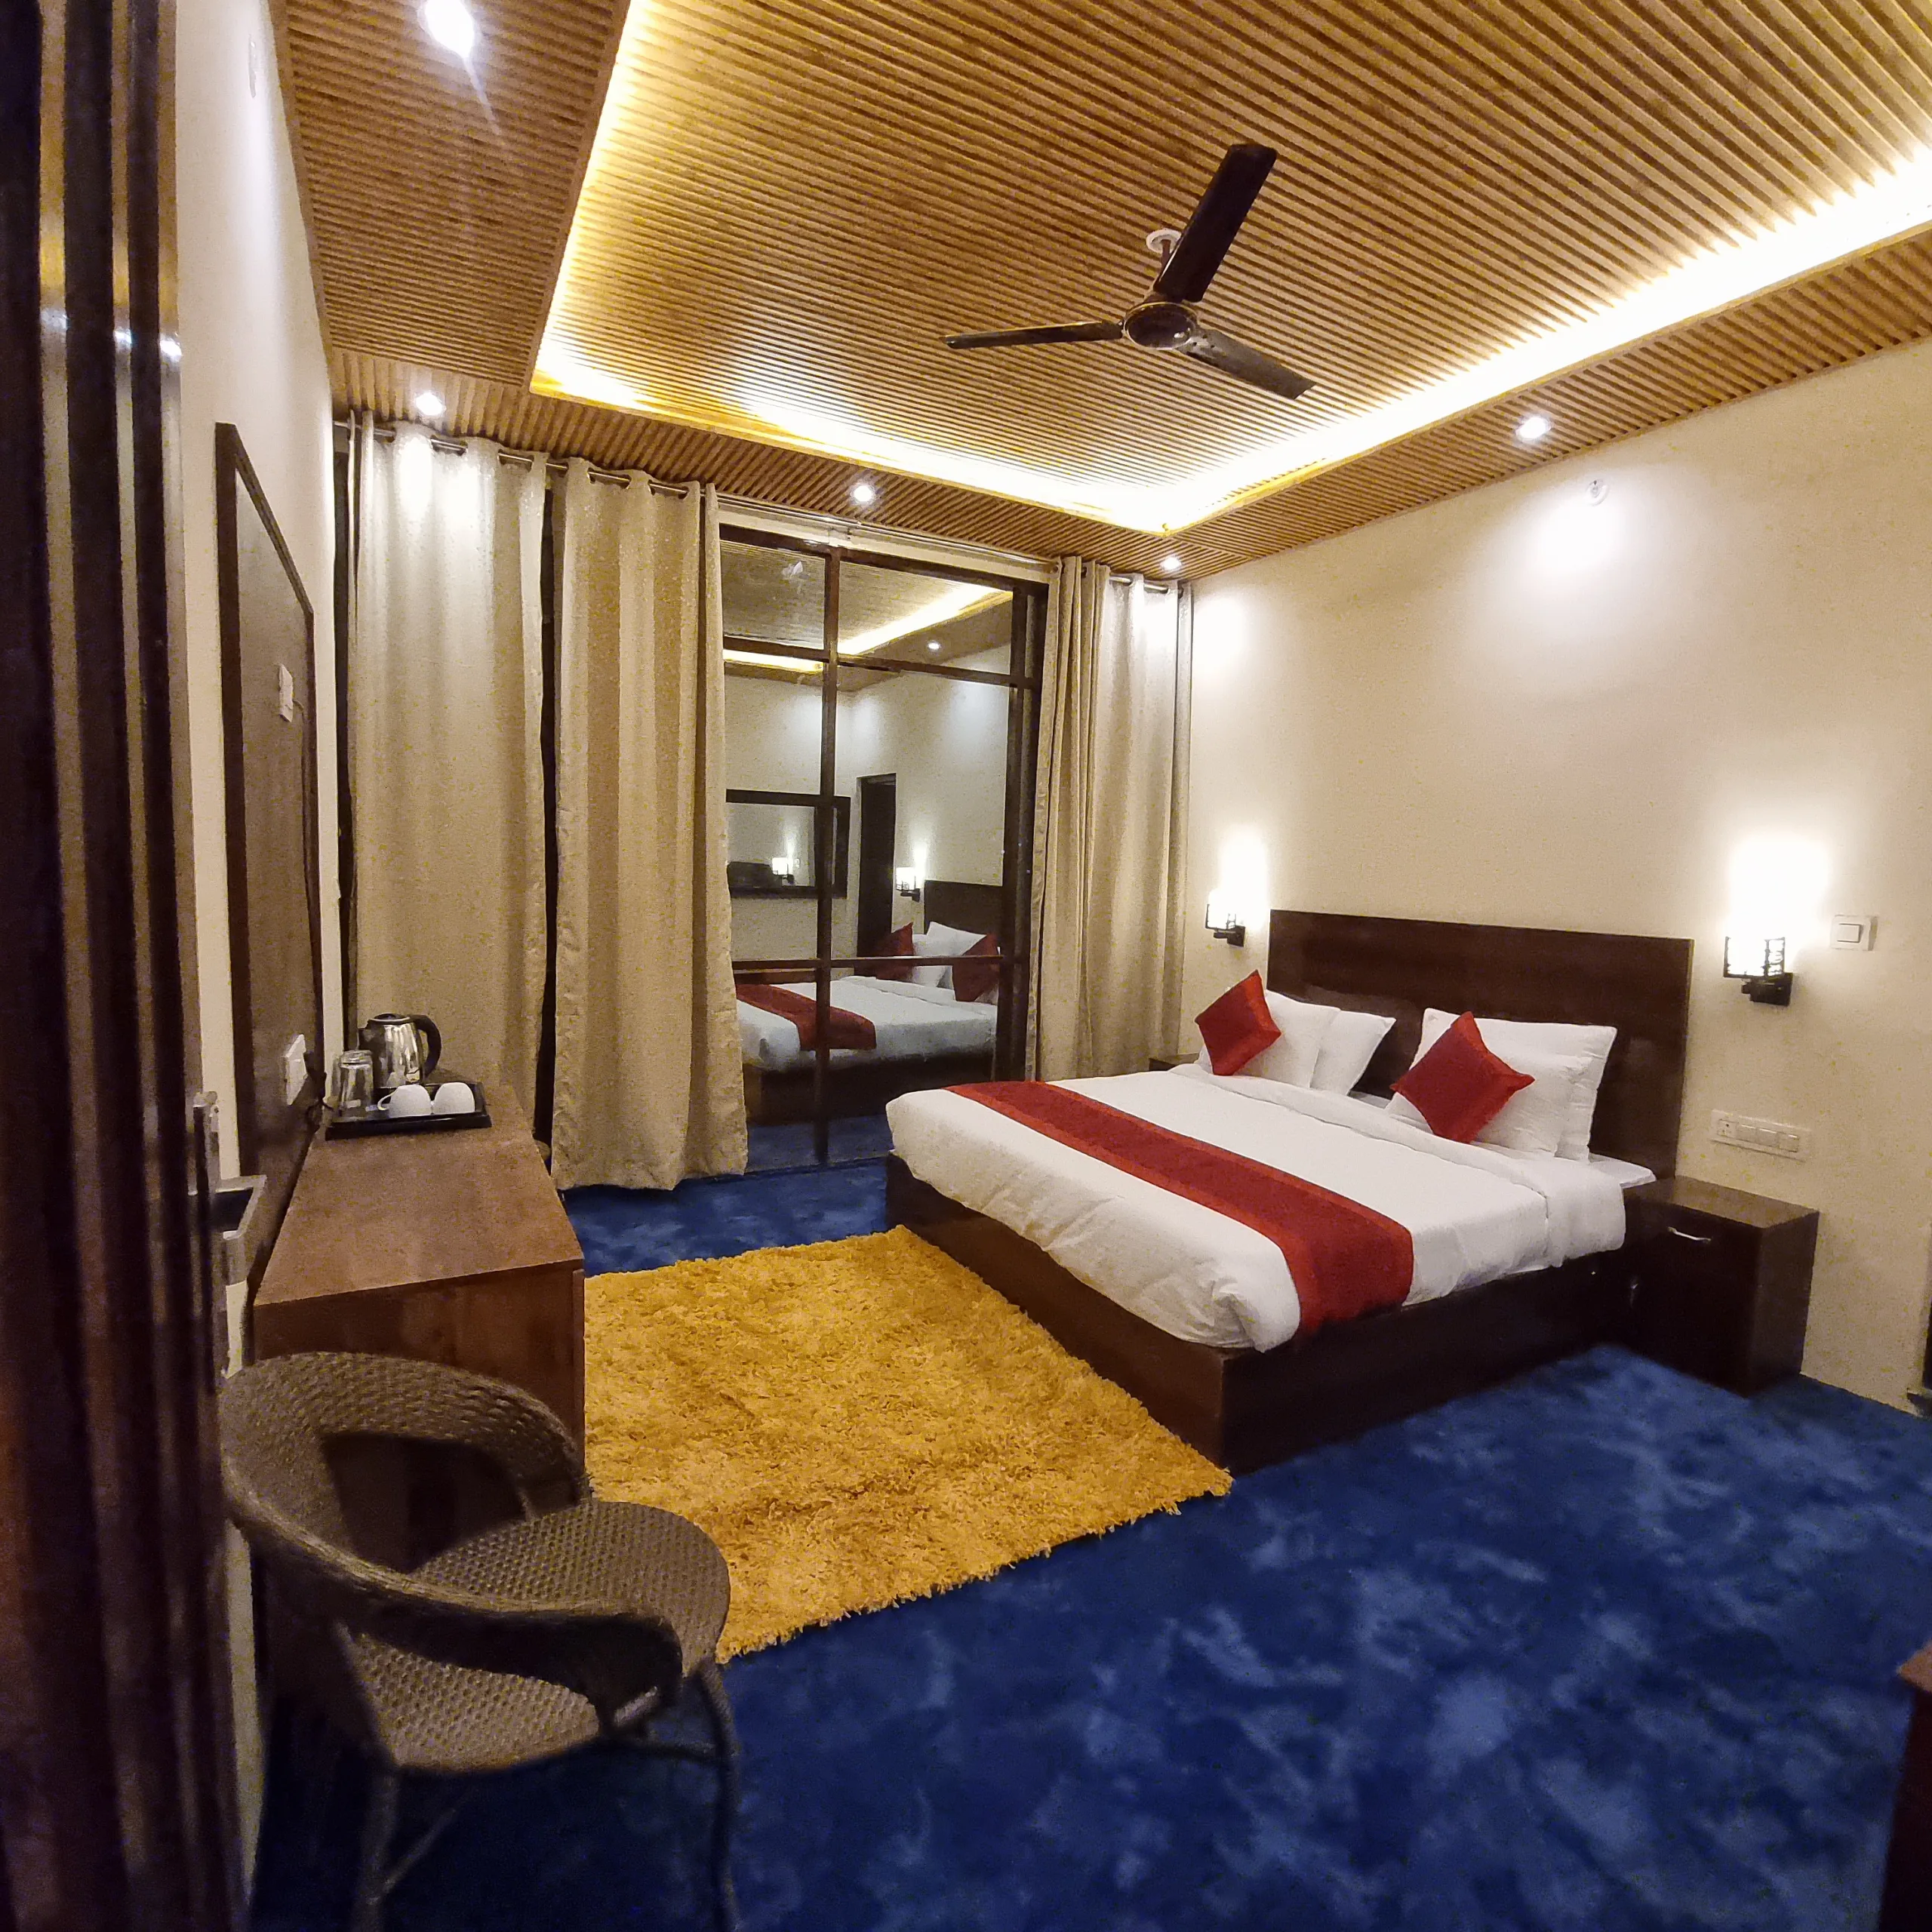 Deluxe Room with private balcony – Kashi Retreat